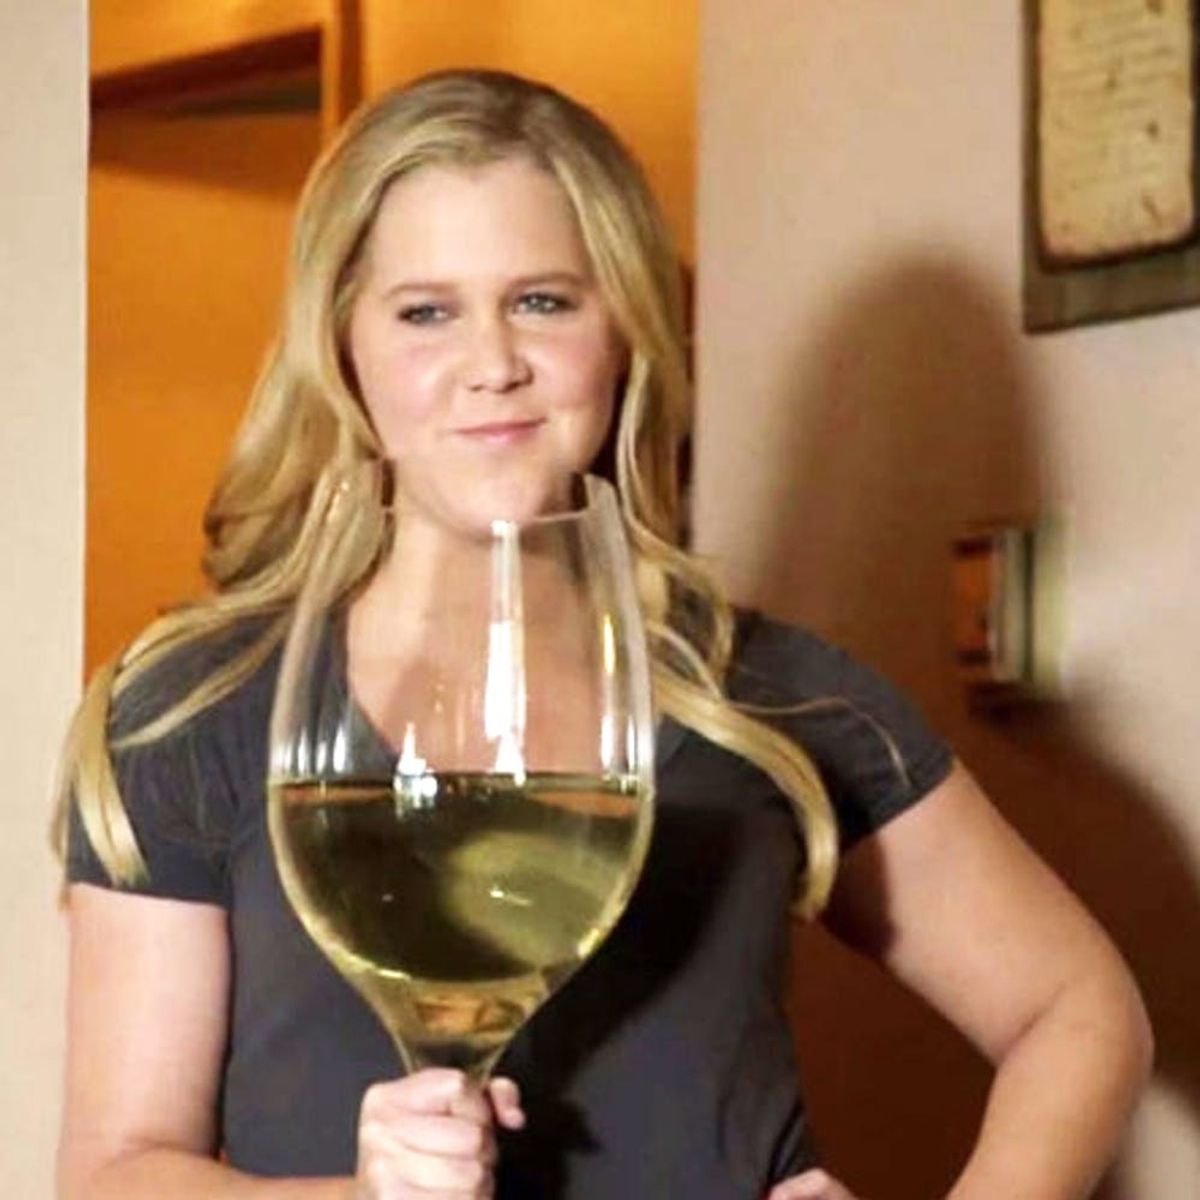 New Study Has REALLY Bad News About Women and Wine